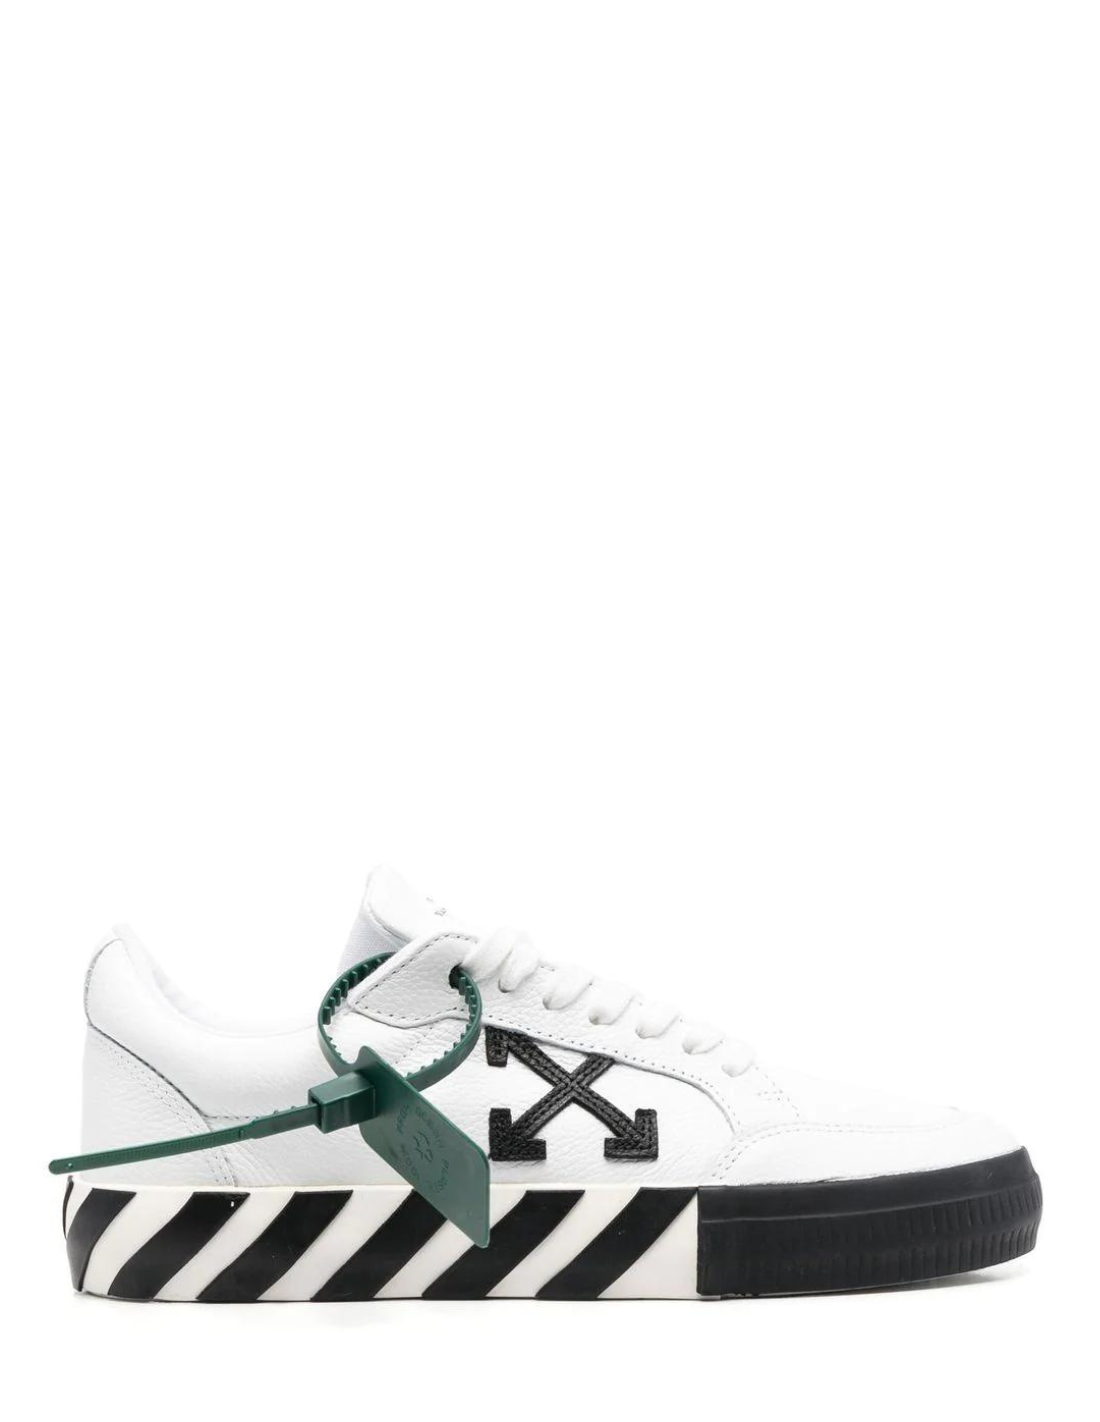 Off-White "Vulcanized" low sneakers and white